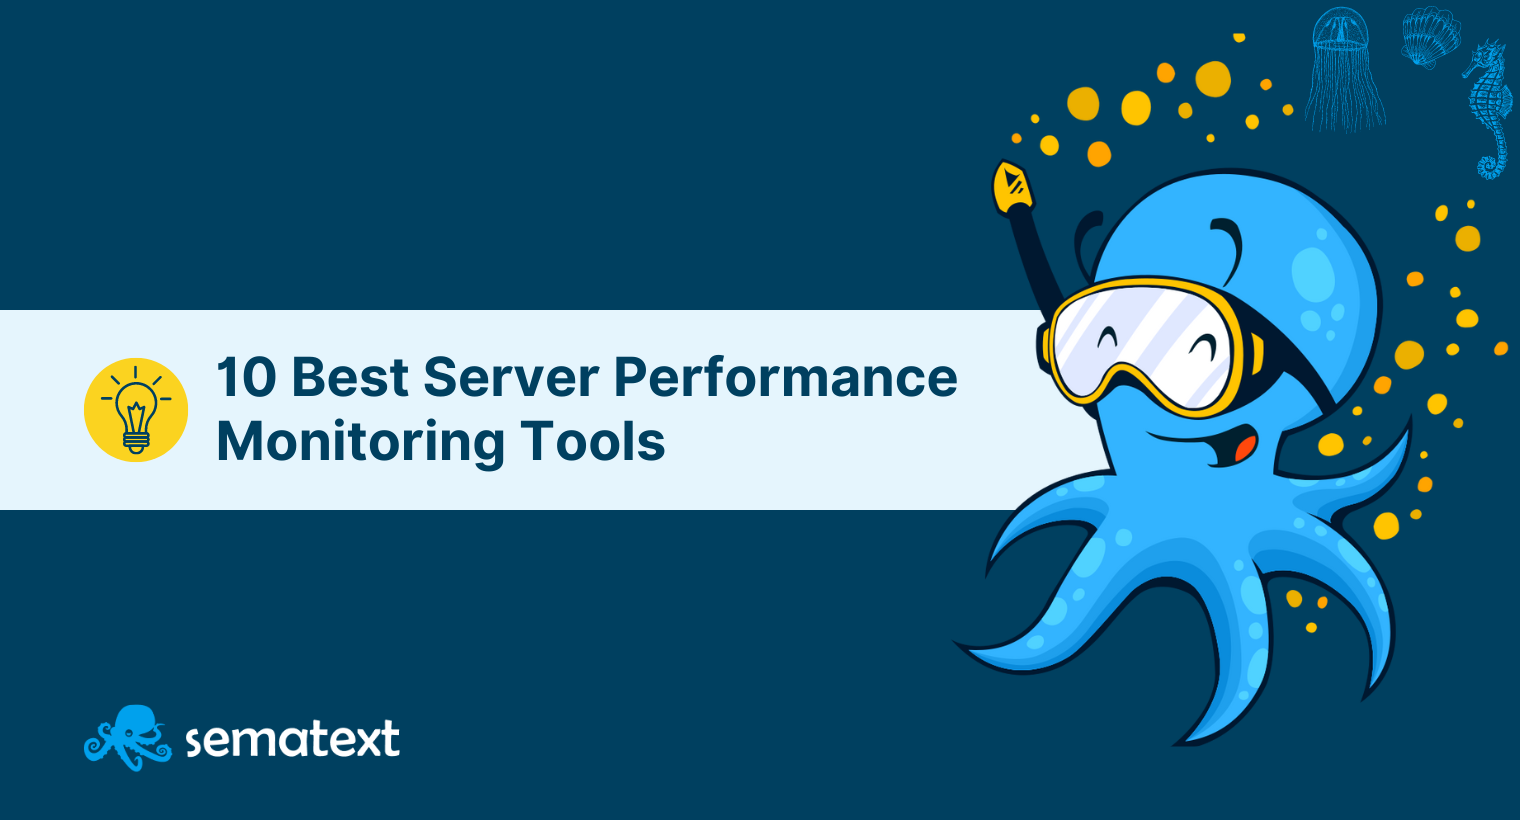 10 Best Server Performance Monitoring Tools & Software in 2022